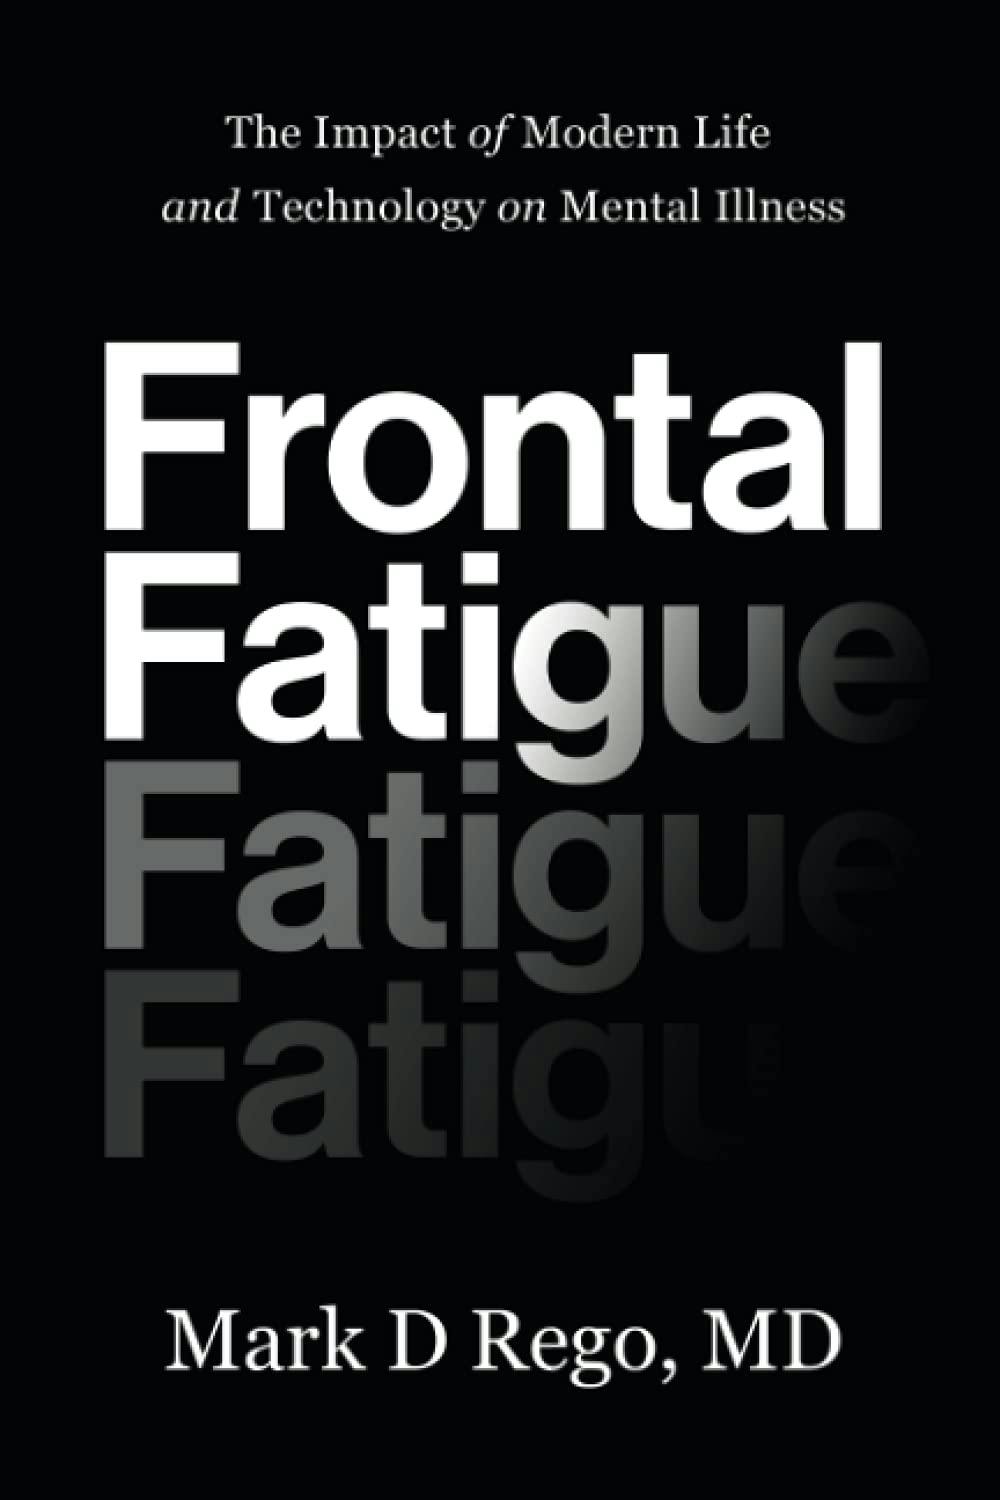 Frontal Fatigue. The Impact of Modern Life and Technology on Mental Illness by Mark D. Rego, MD